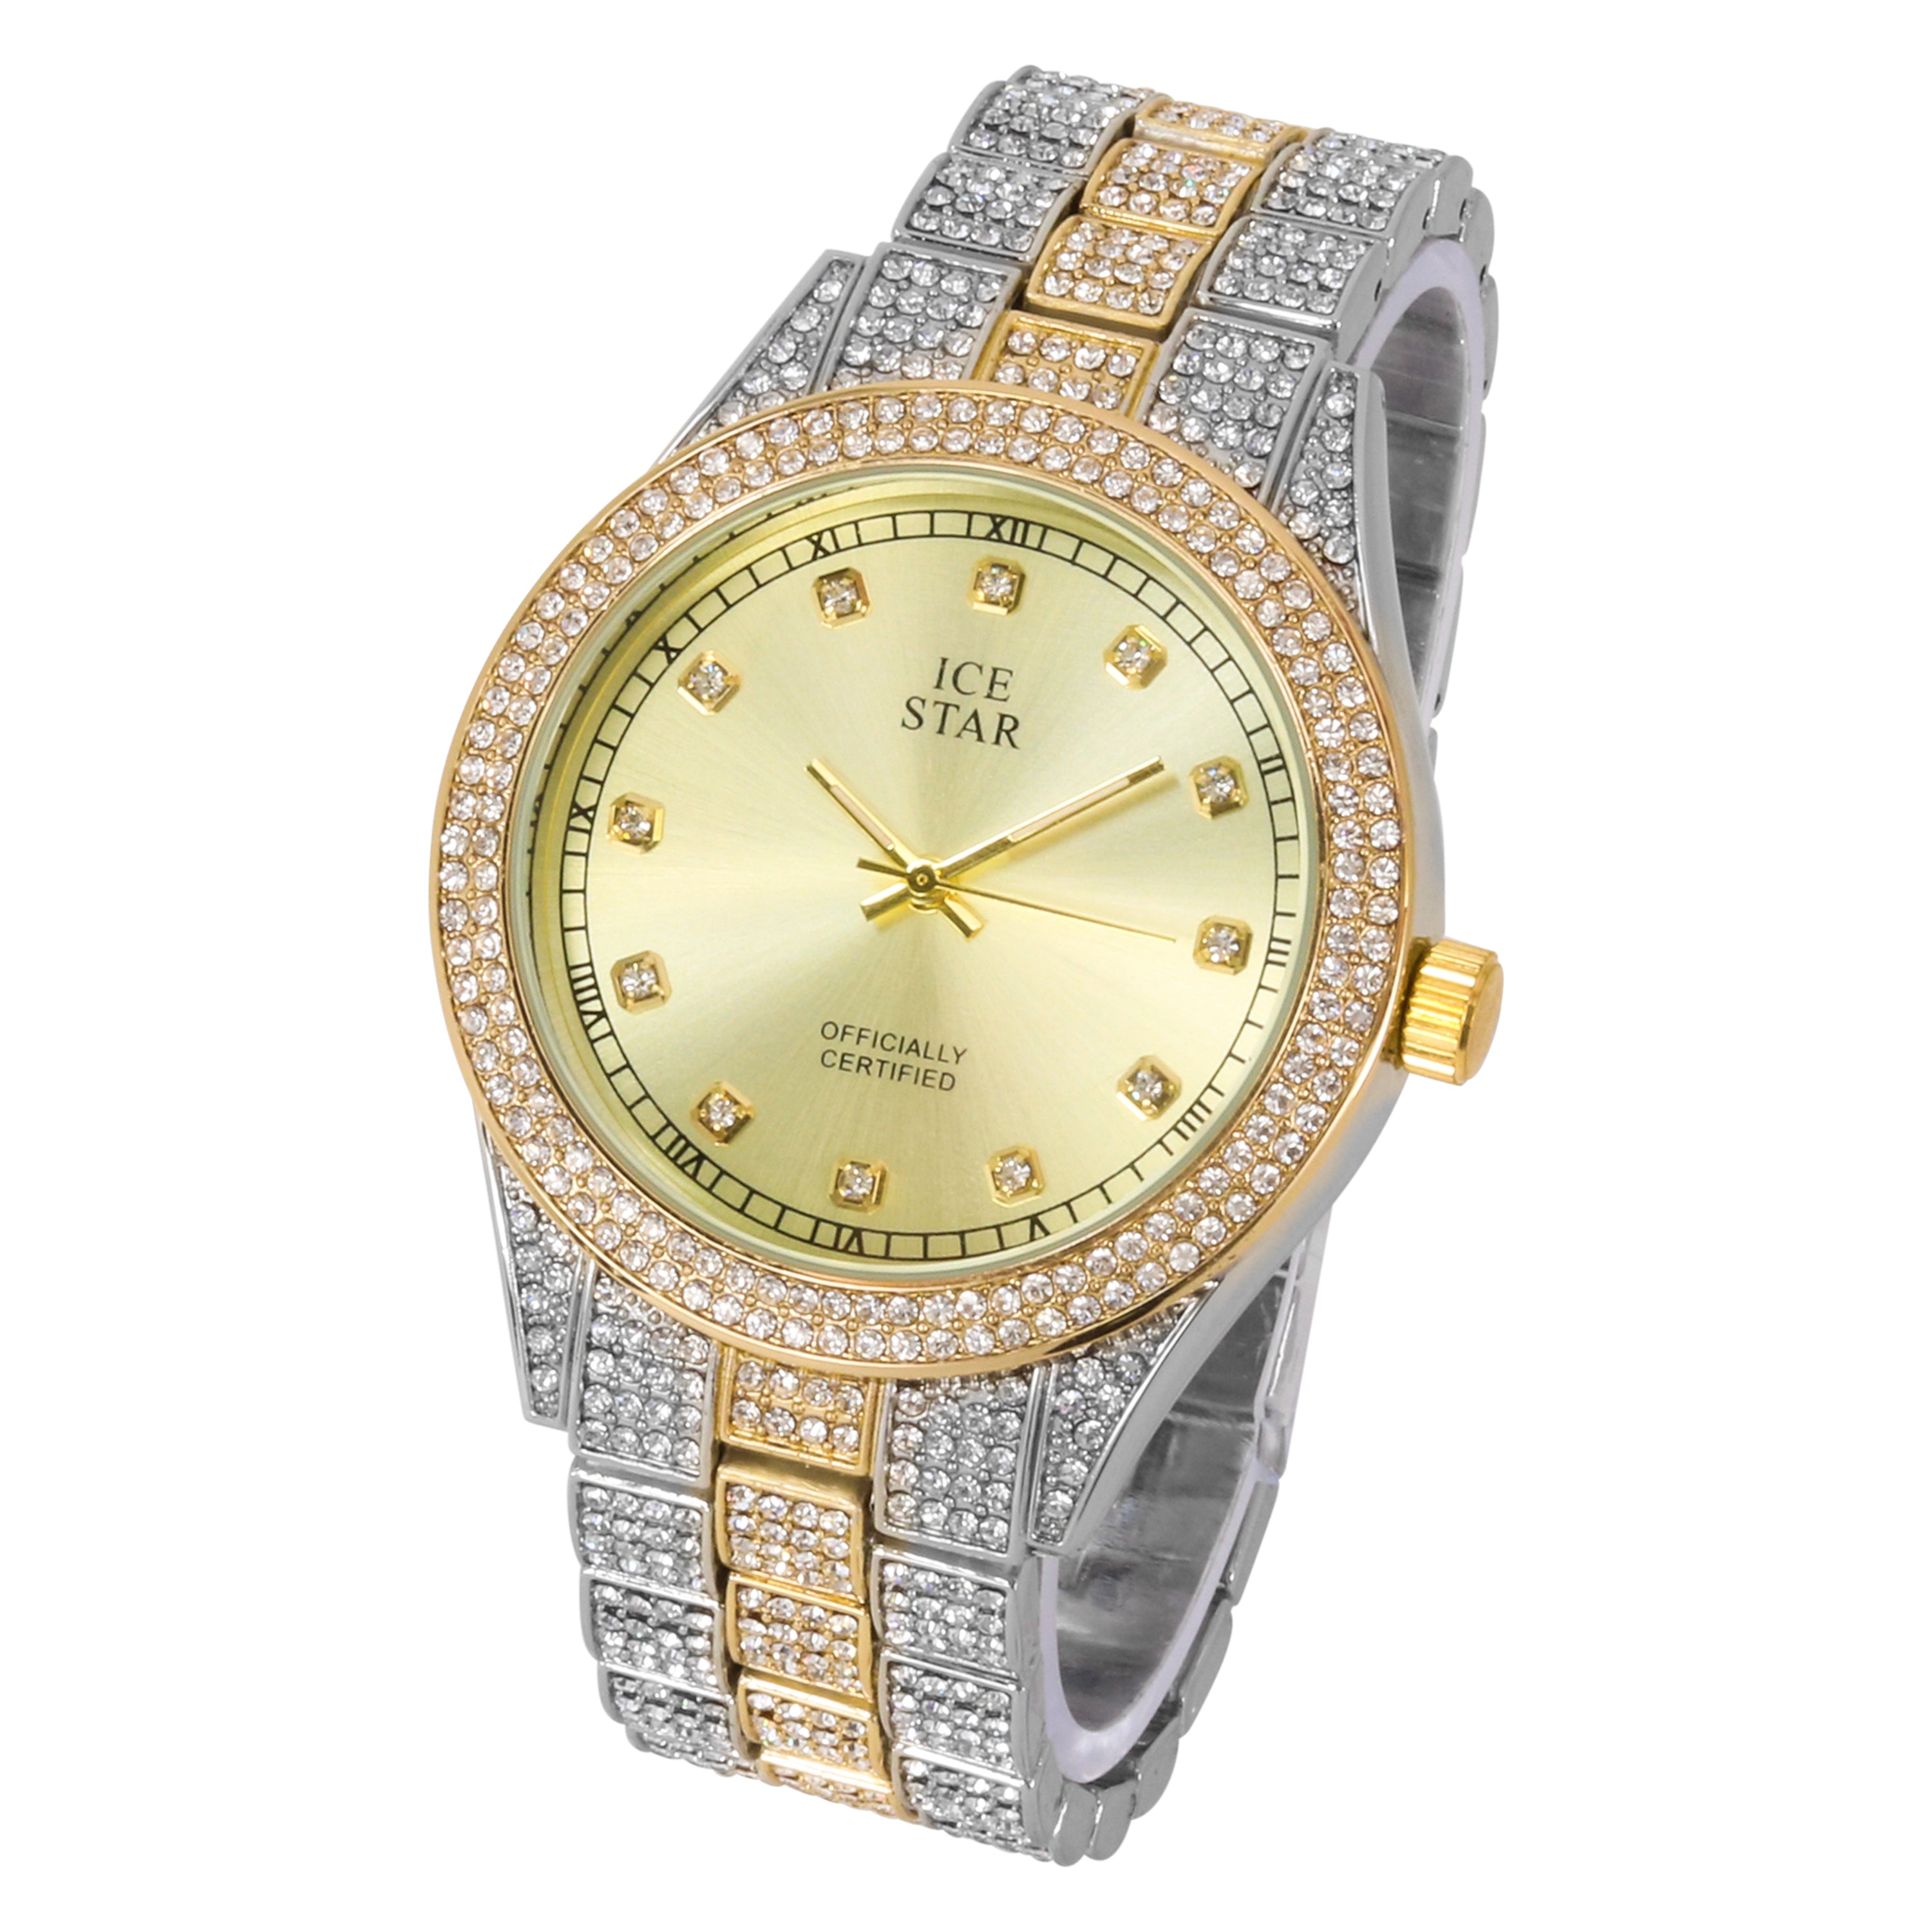 Men's Round Iced Out Watch 43mm Two-Tone